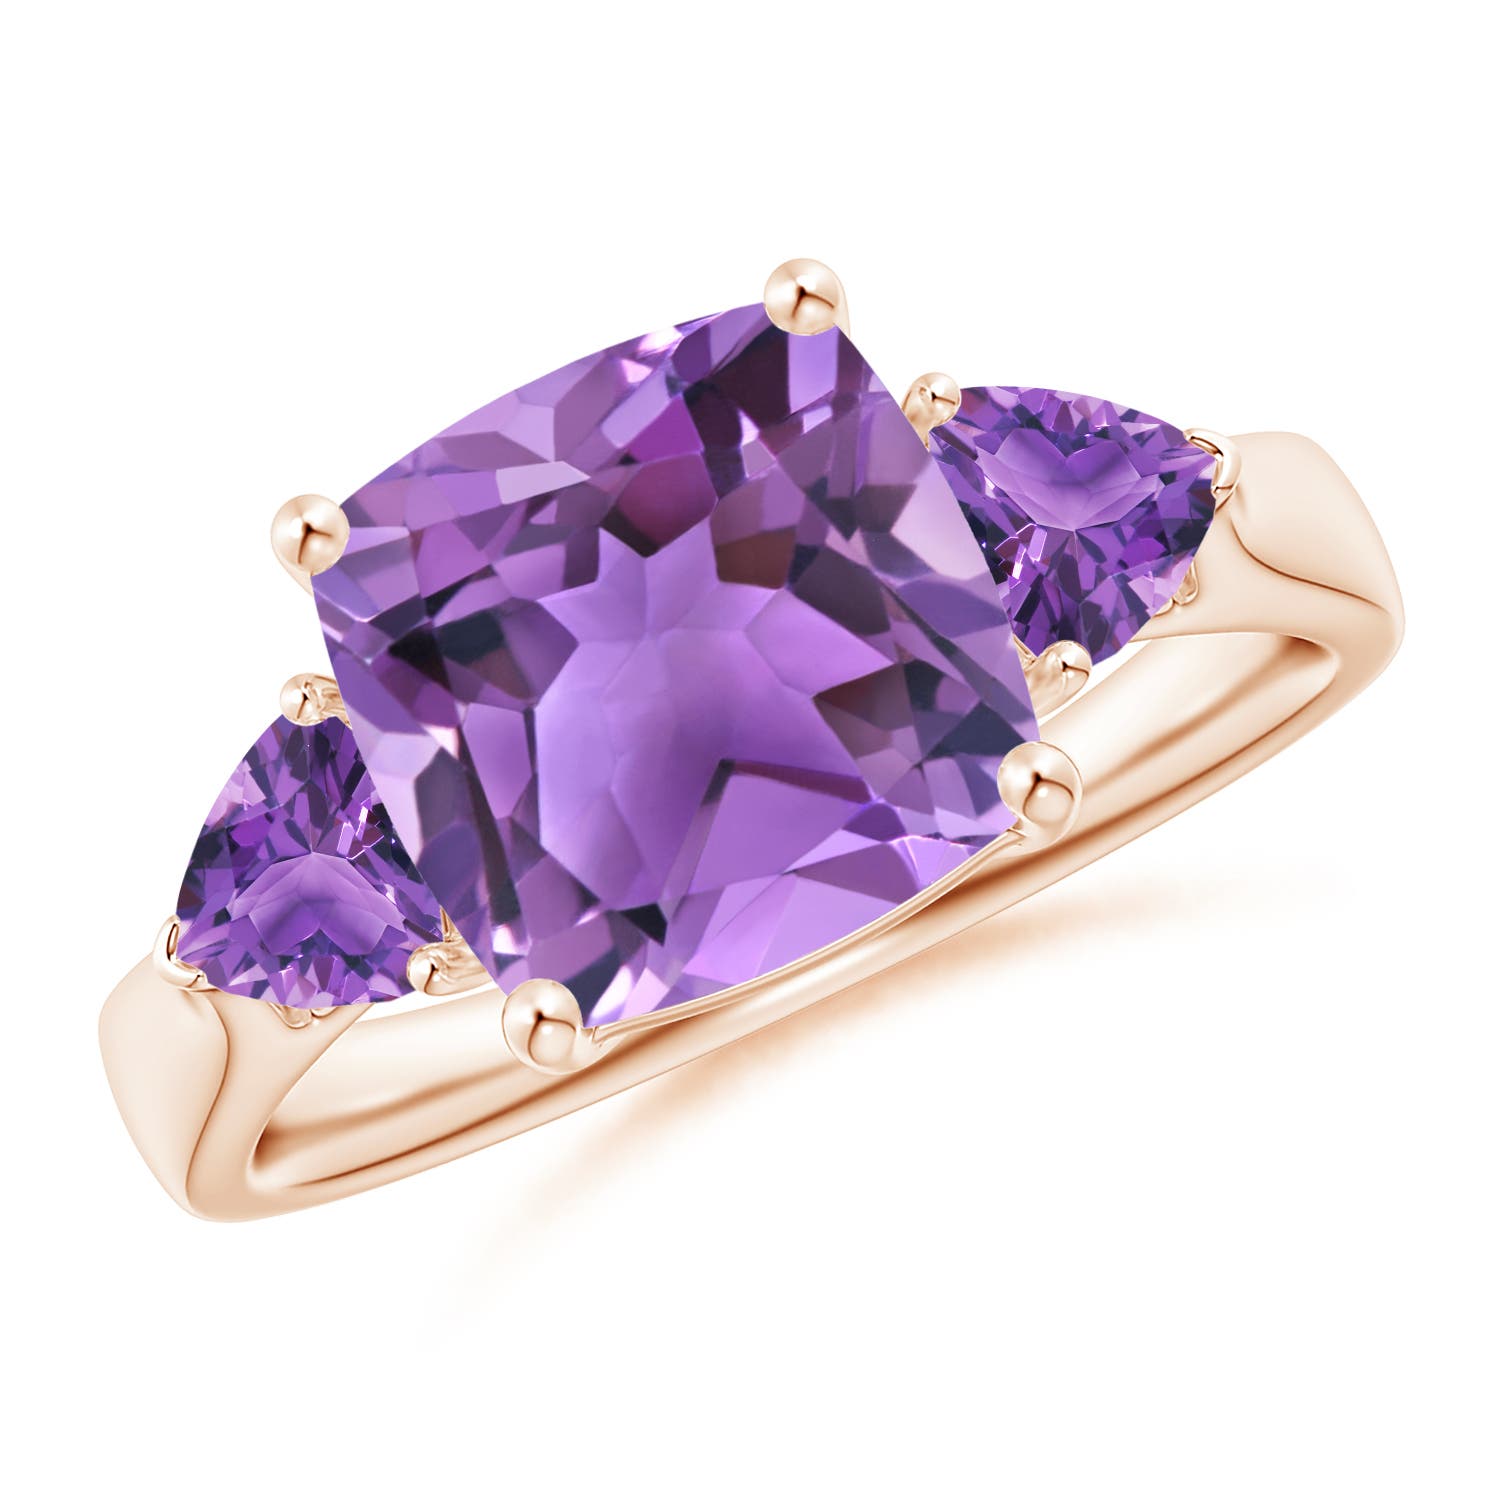 AA - Amethyst / 3.9 CT / 14 KT Rose Gold